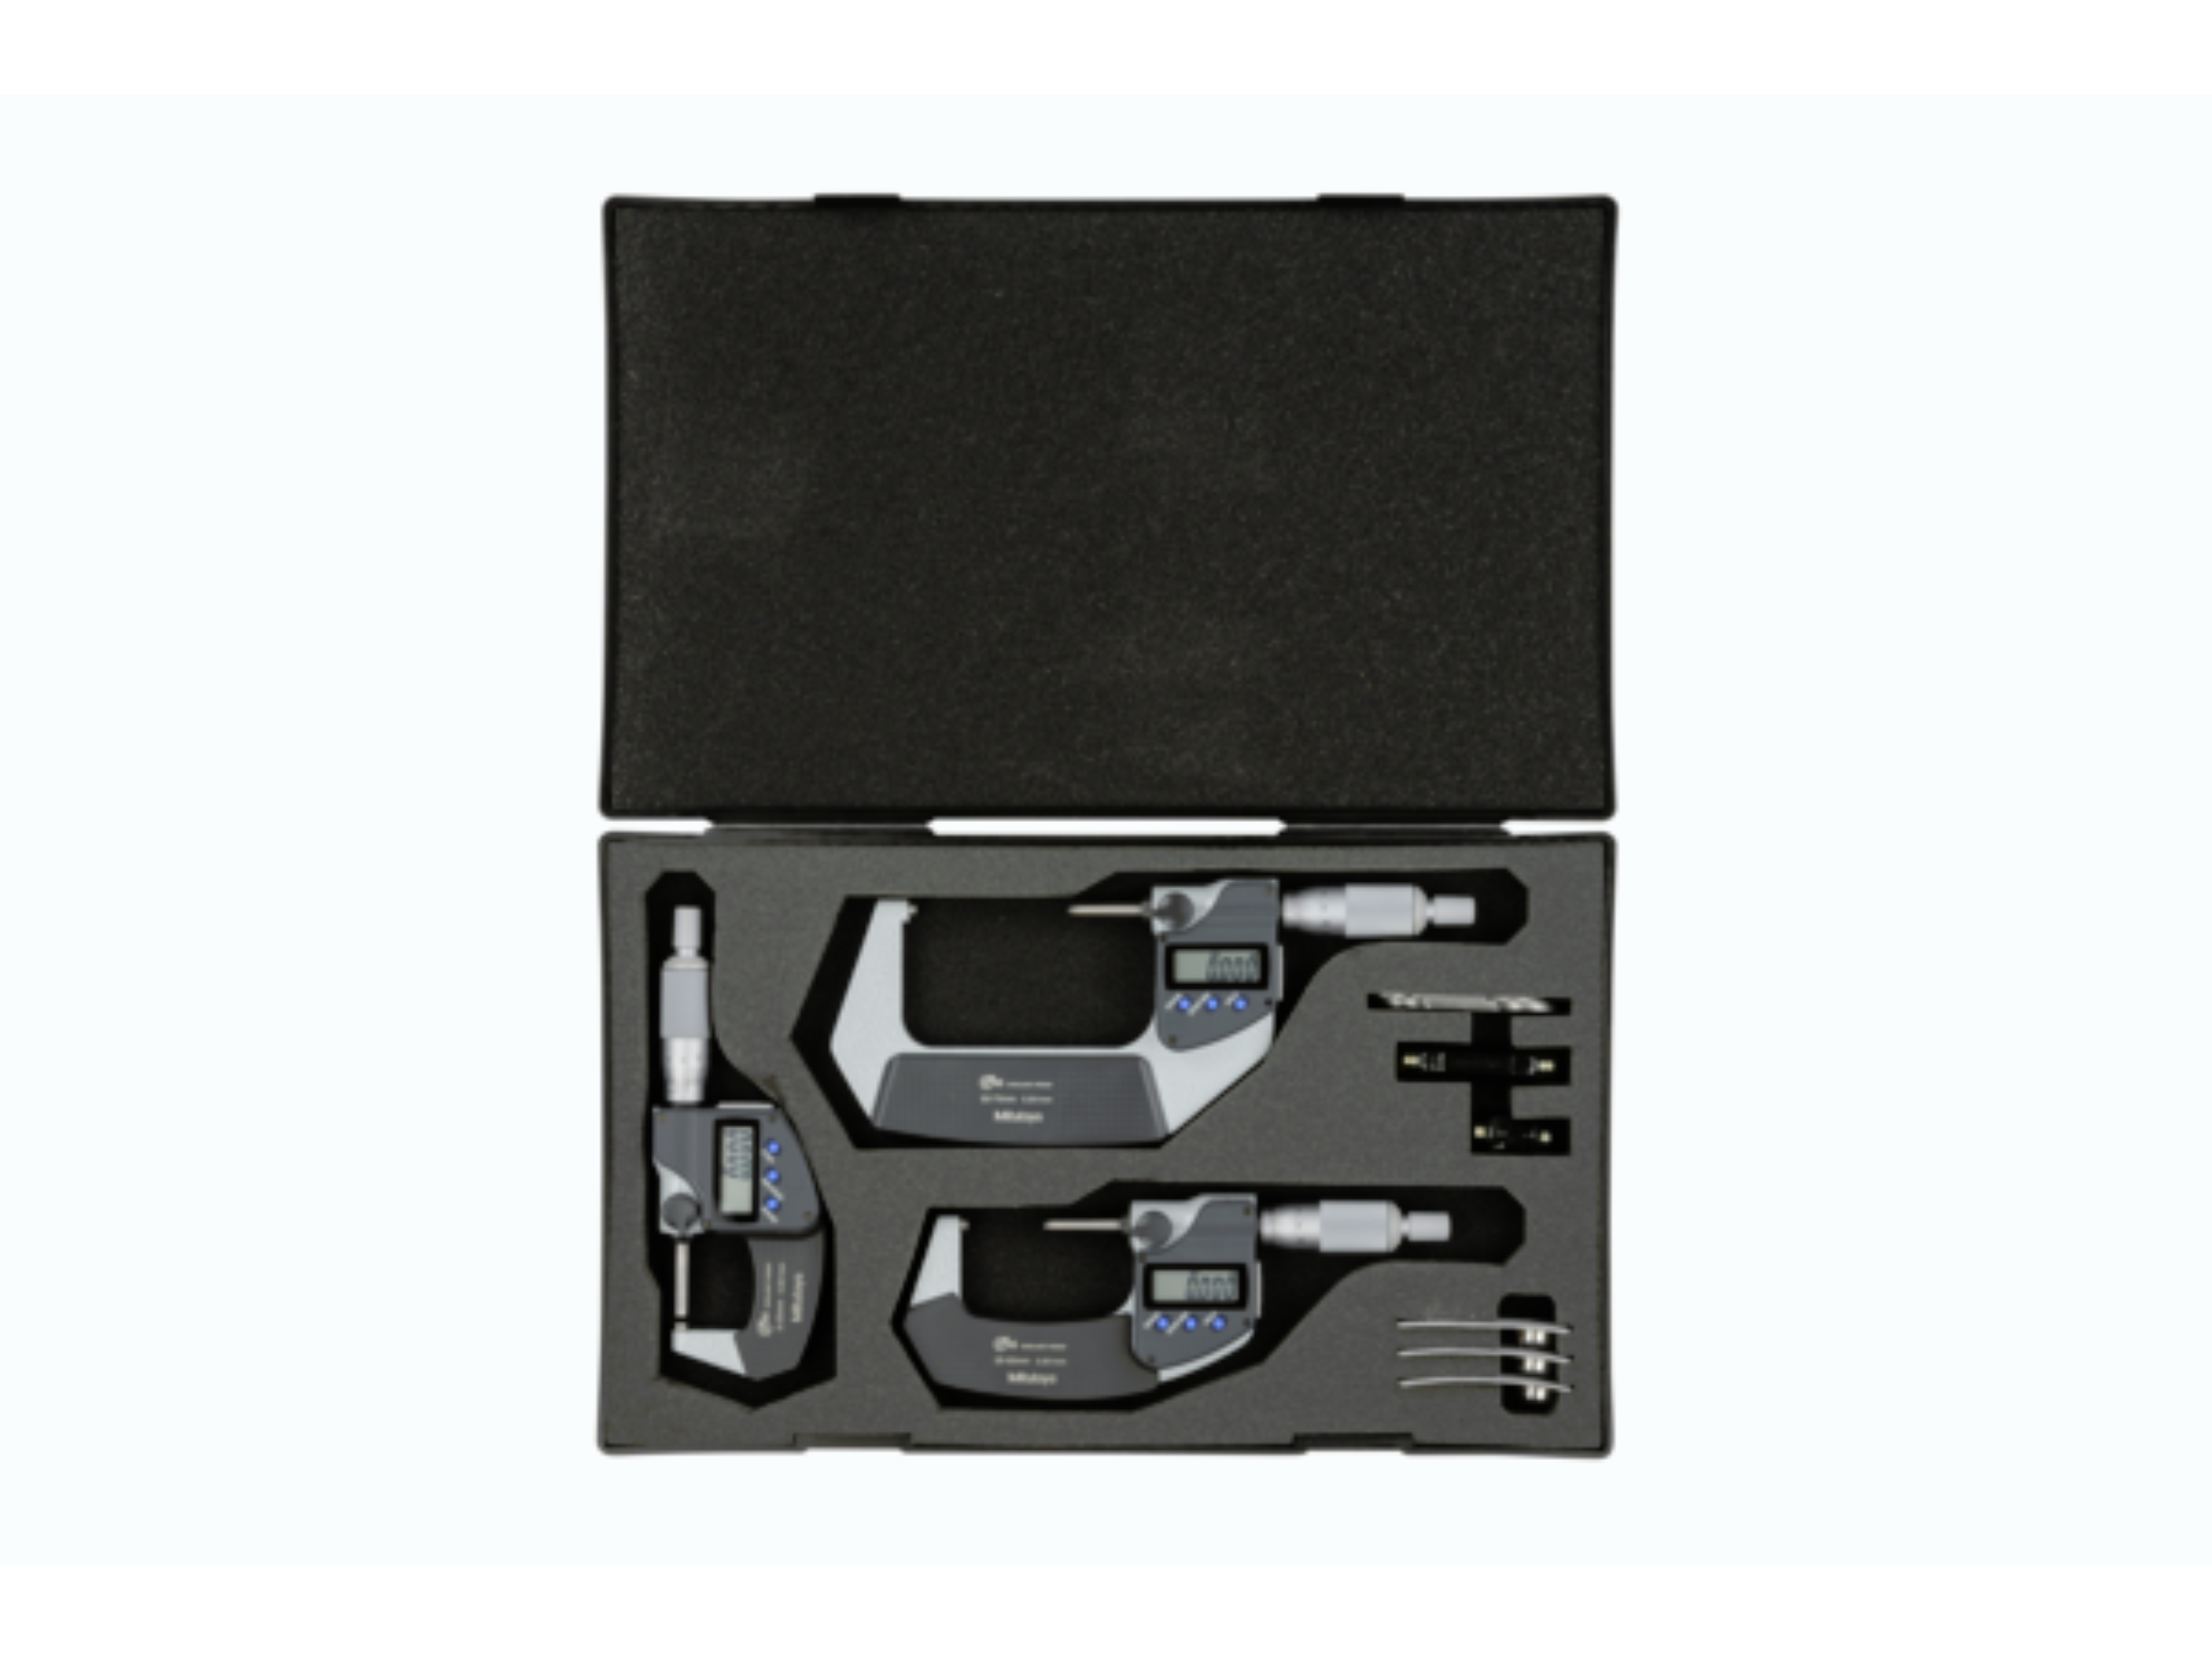 Metric Digimatic Micrometer Set 0-75mm, IP65, Ratchet Stop, With Output, 293-962-30